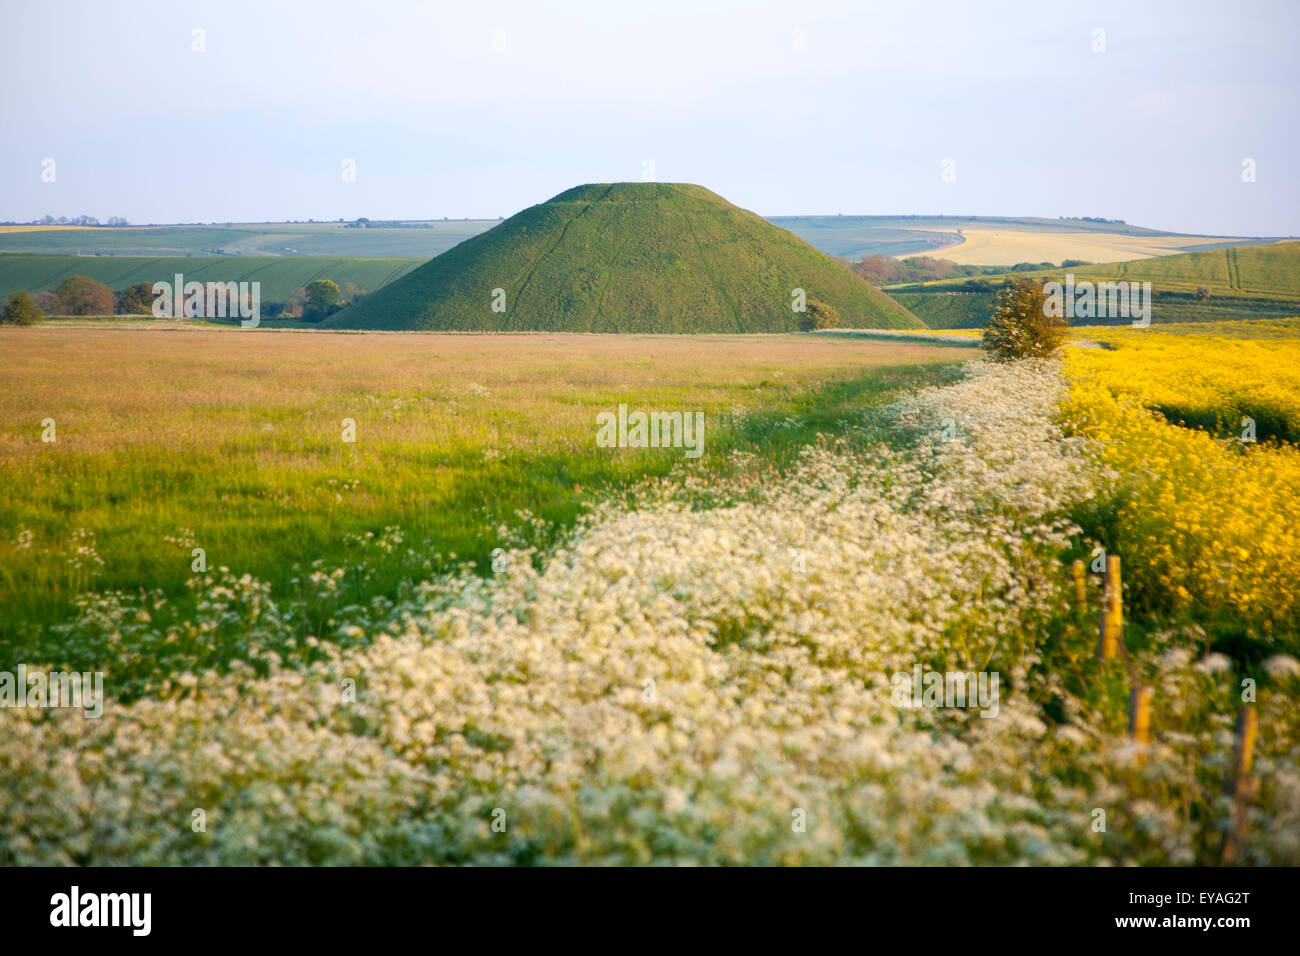 Silbury Hill prehistoric site, near Avebury, Wiltshire, England, UK is the largest man made mound in Europe. Stock Photo